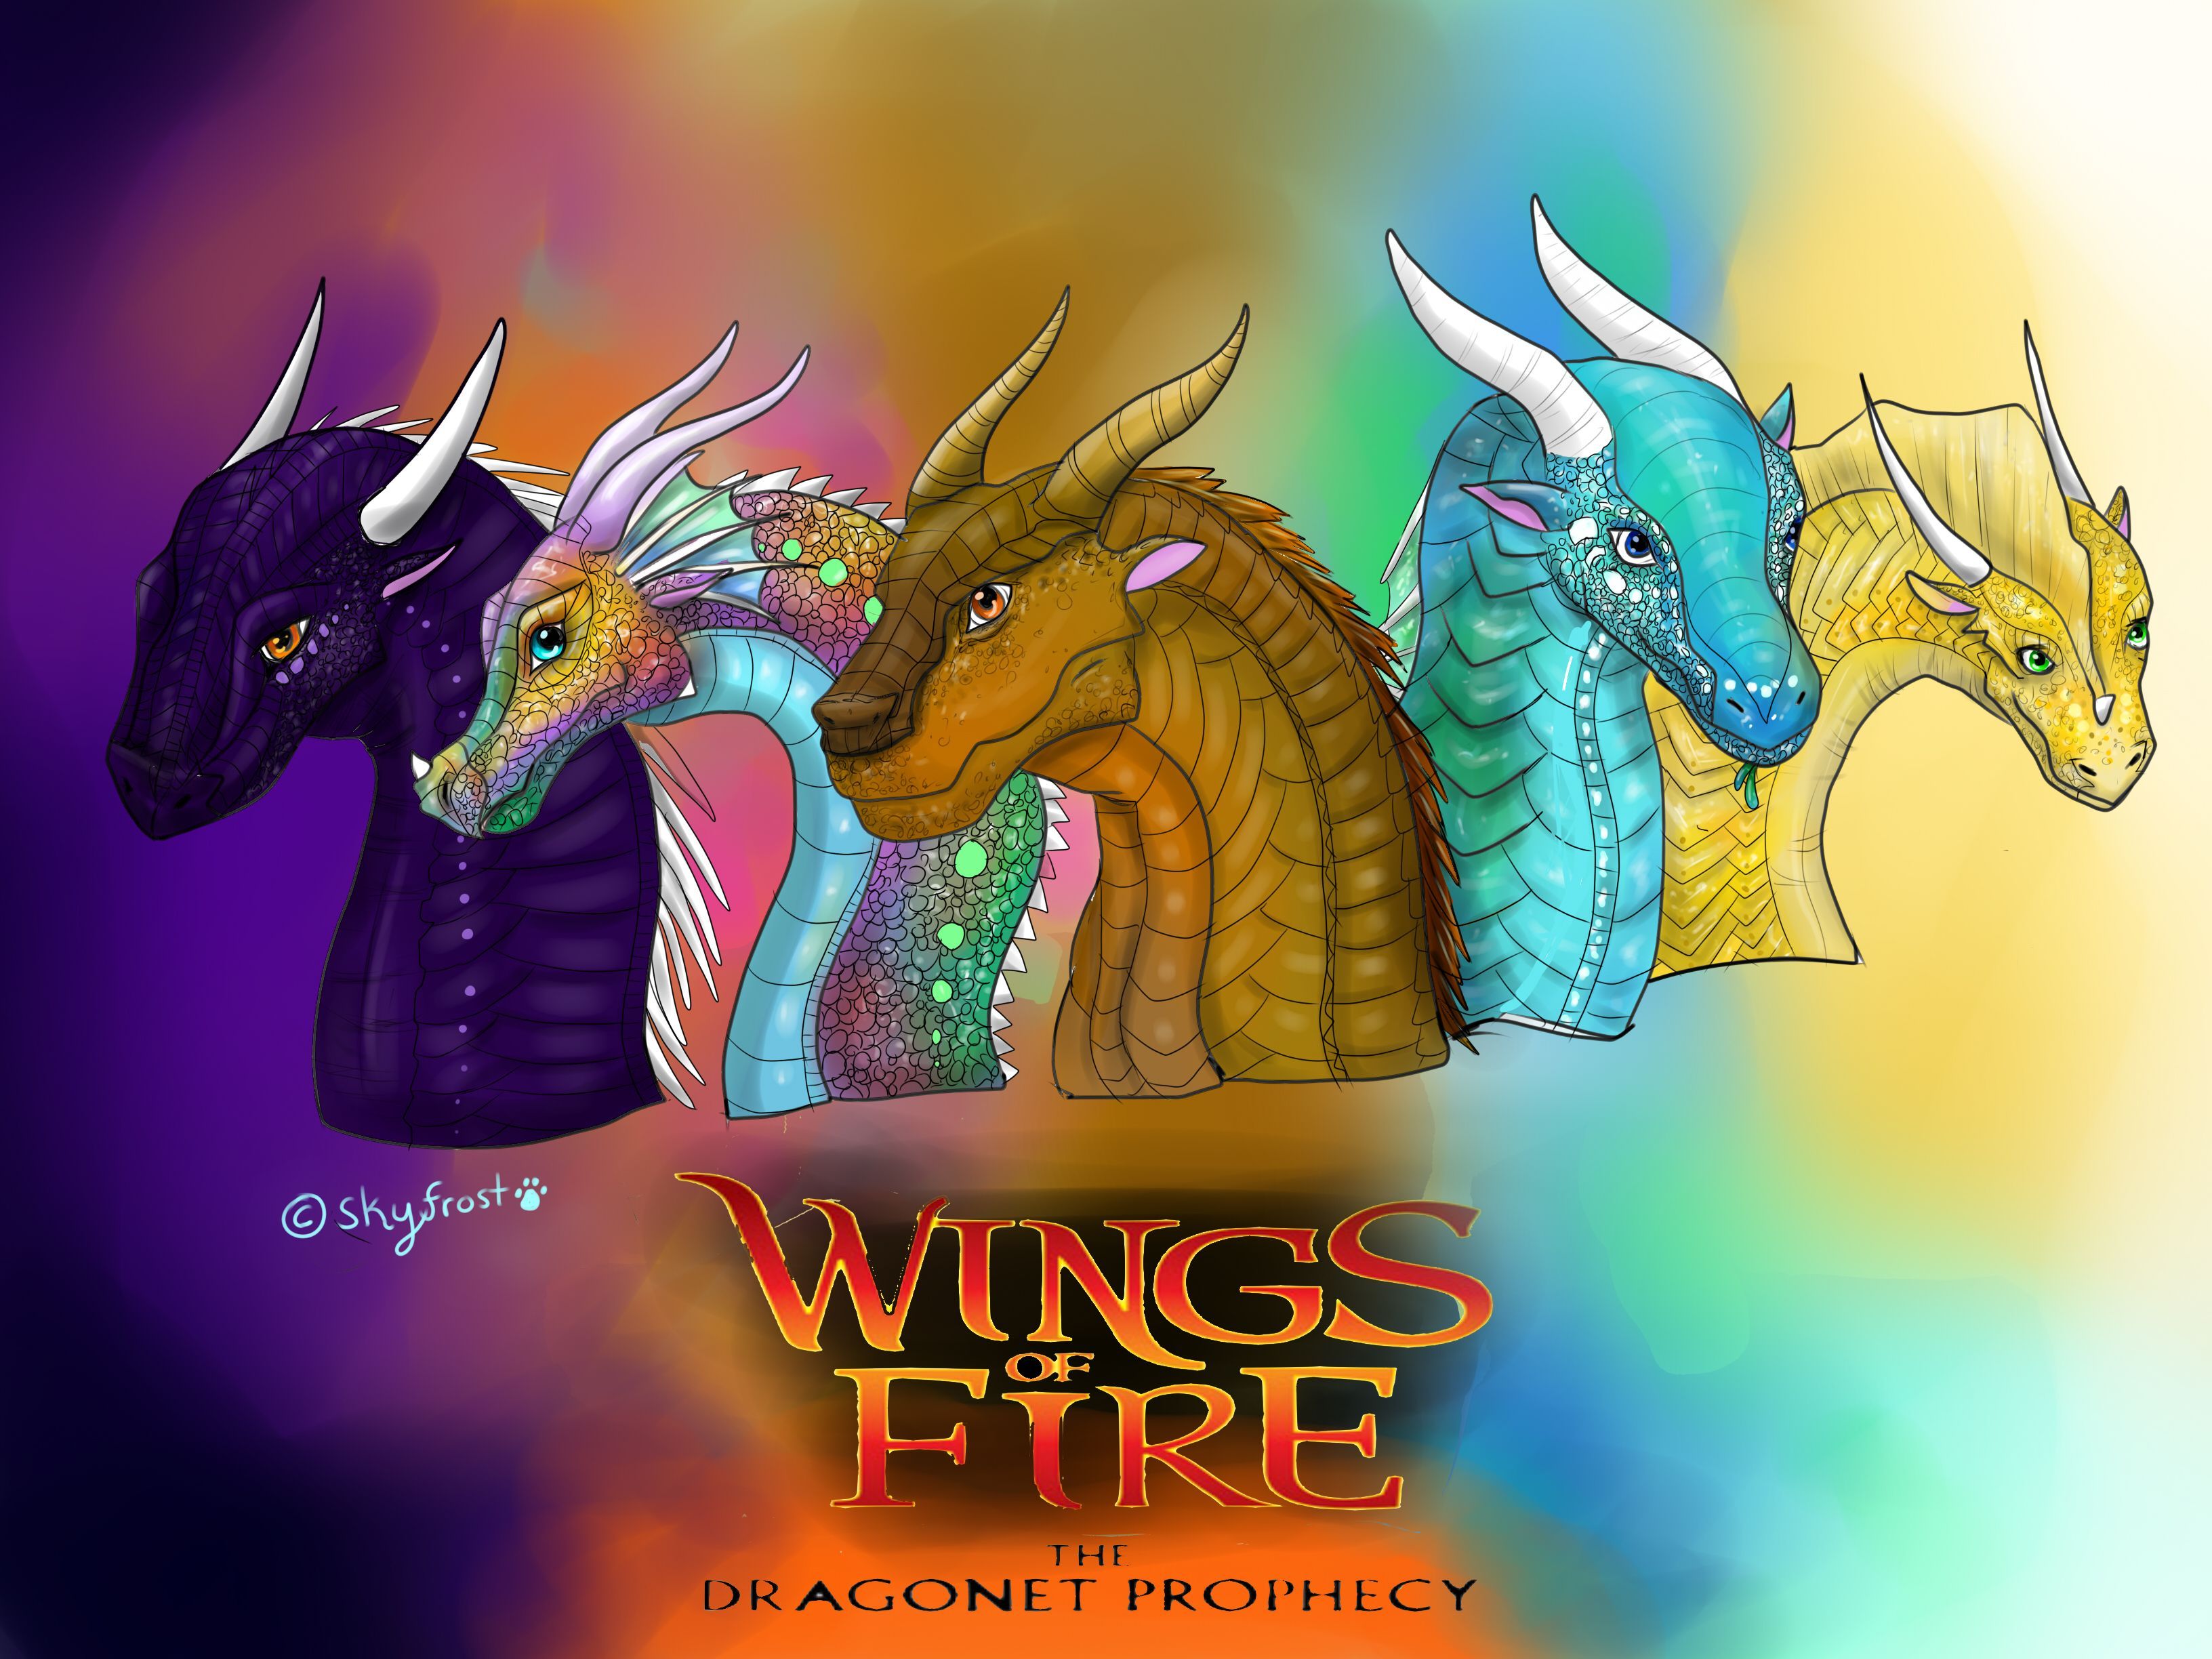 Awesome cool stuff I like. Wings of fire, Wings of fire dragons, Wings